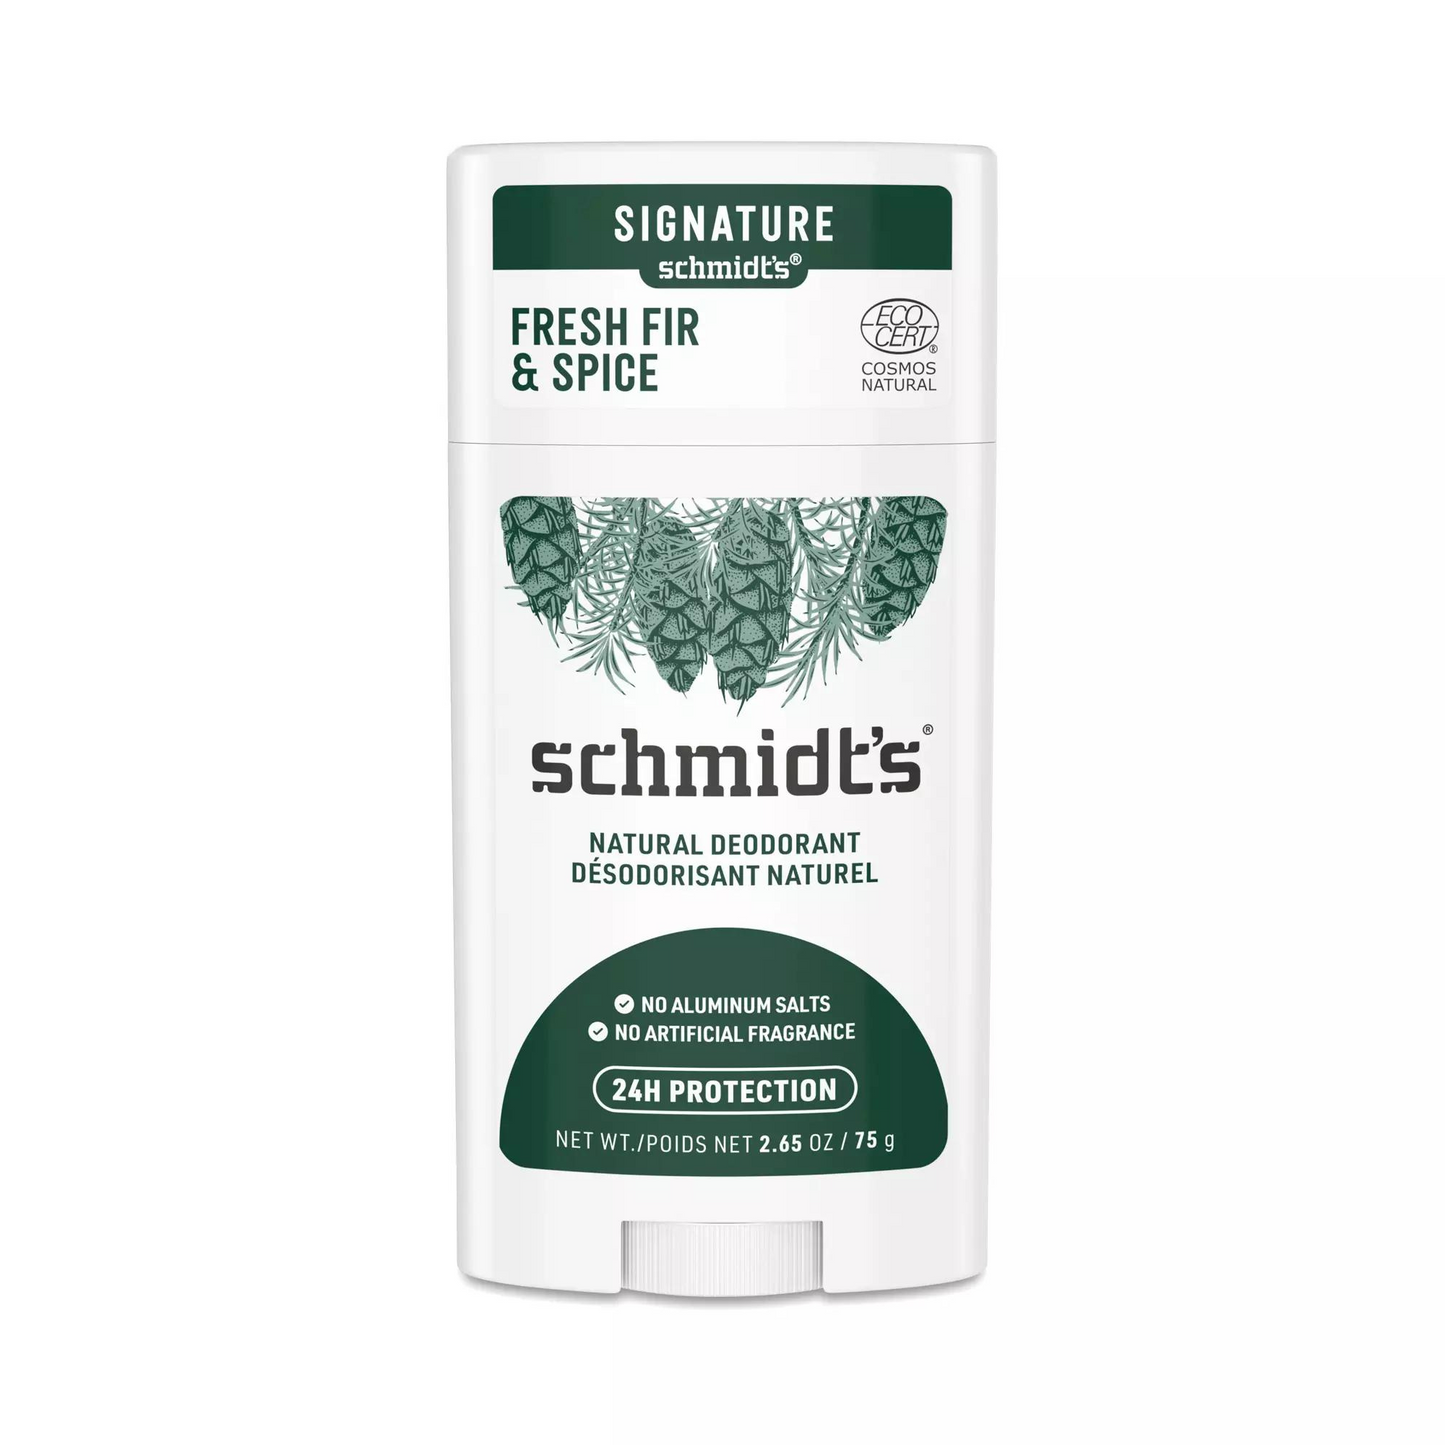 Primary Image of Schmidt's Fresh Fir & Spice Deo Stick (2.65 oz)